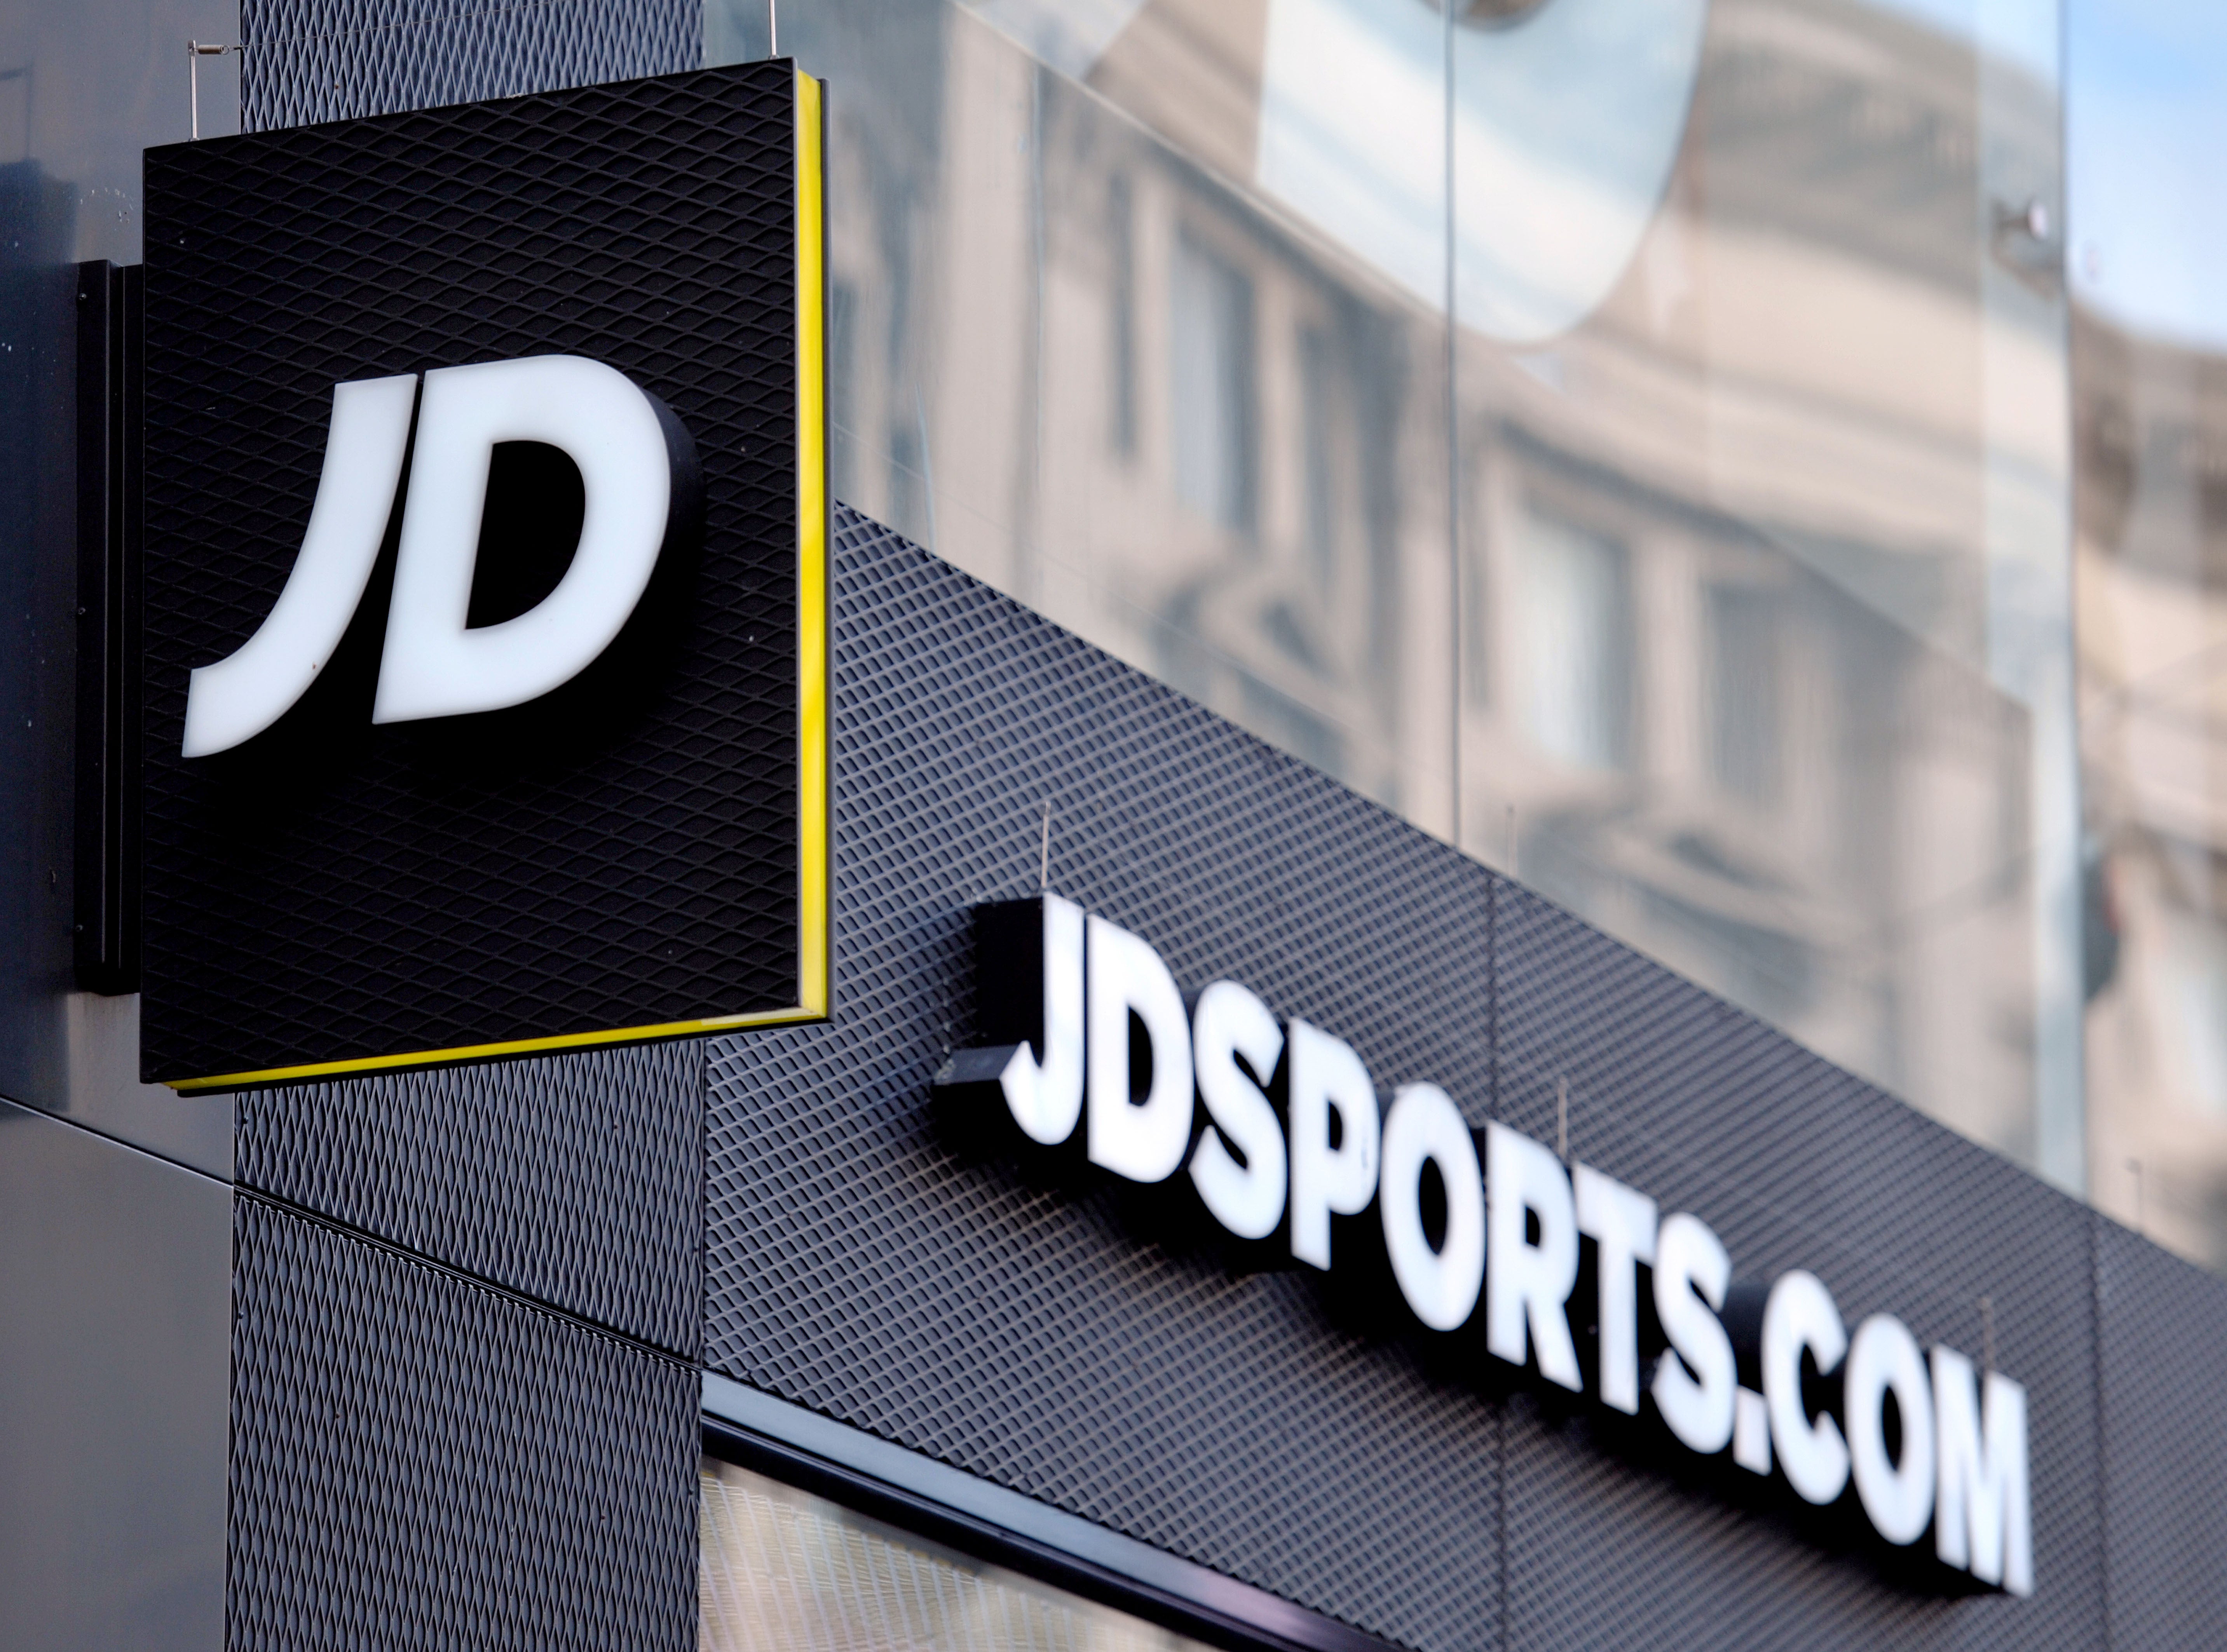 Retailer JD Sports has hired former Morrisons boss Andy Higginson as its new chairman (Nick Ansell/PA)